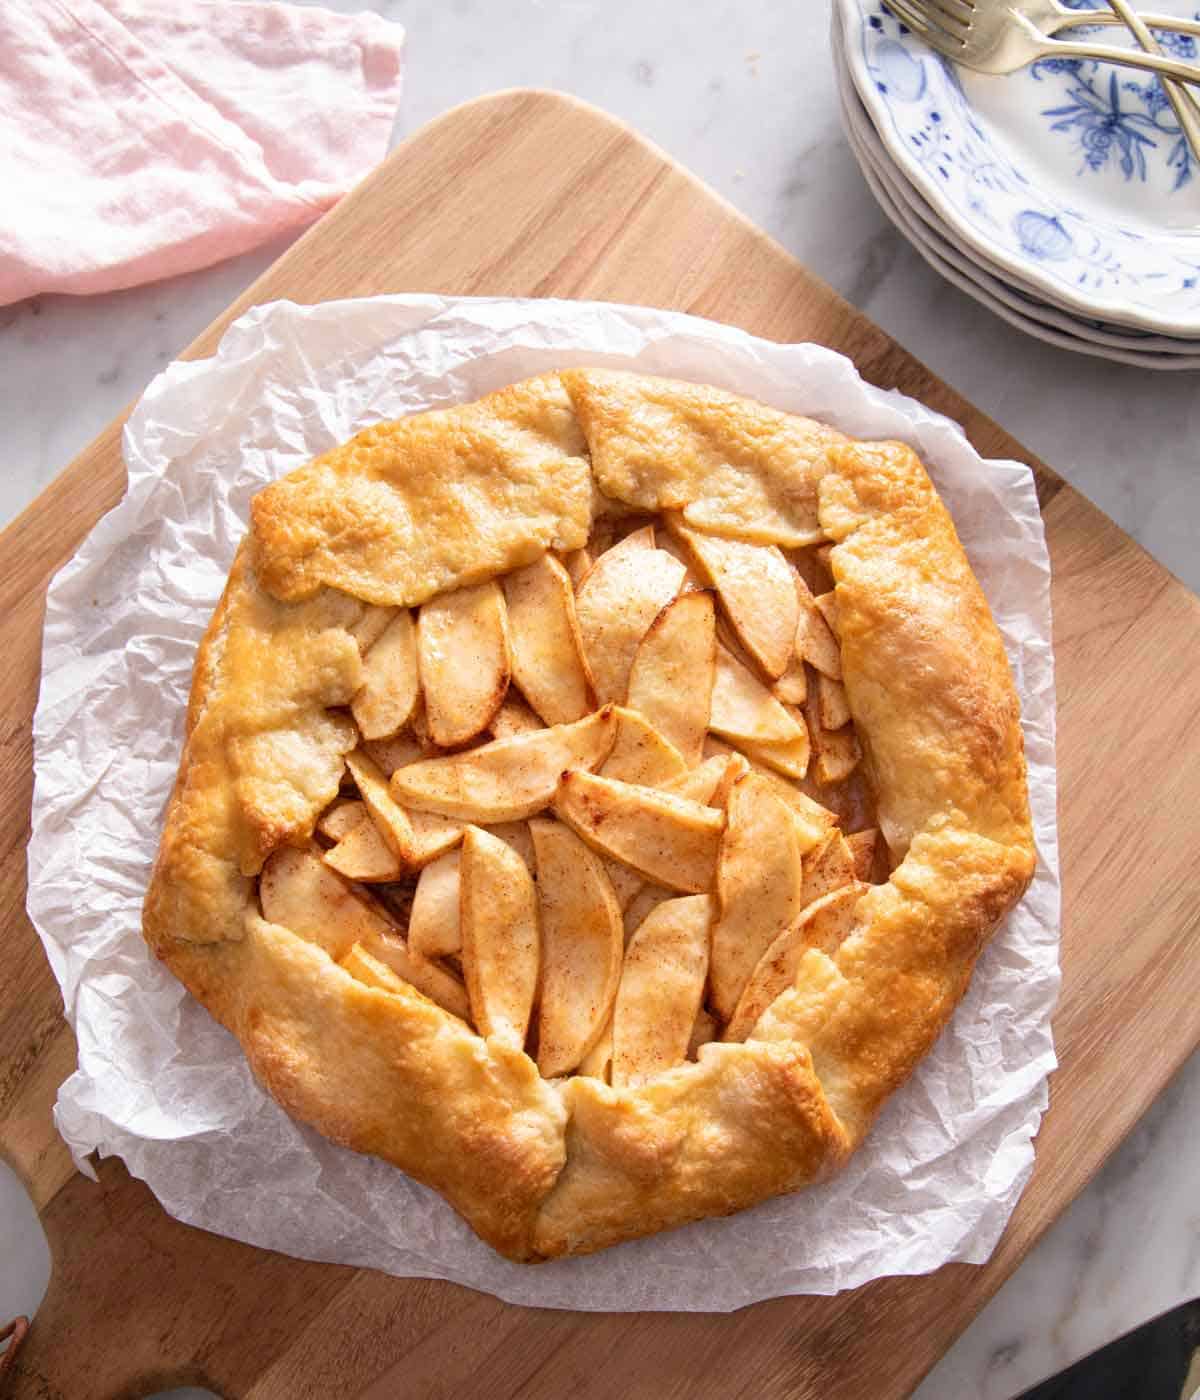 Overhead view of an apple galette on a sheet of parchment paper on a wooden serving board.